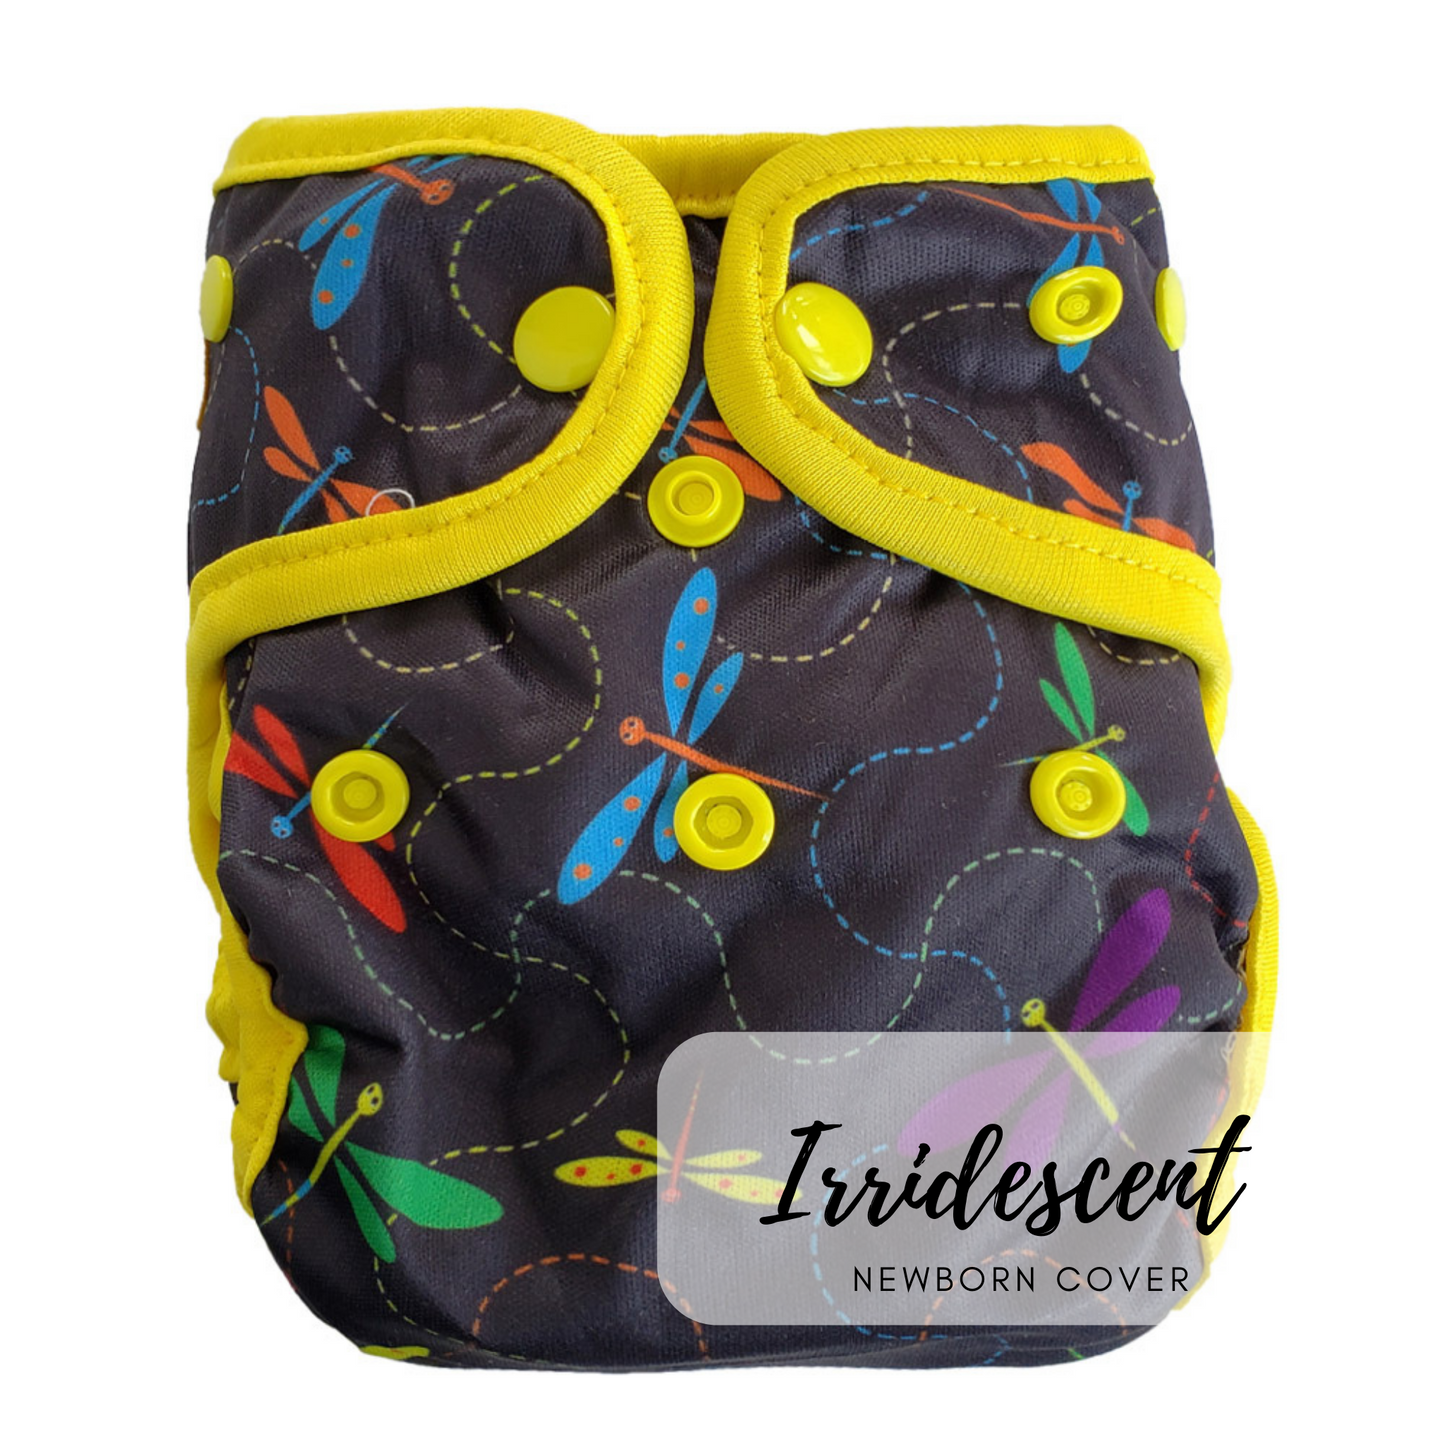 Newborn Double Gusset Wipeable Cover - Irridescent